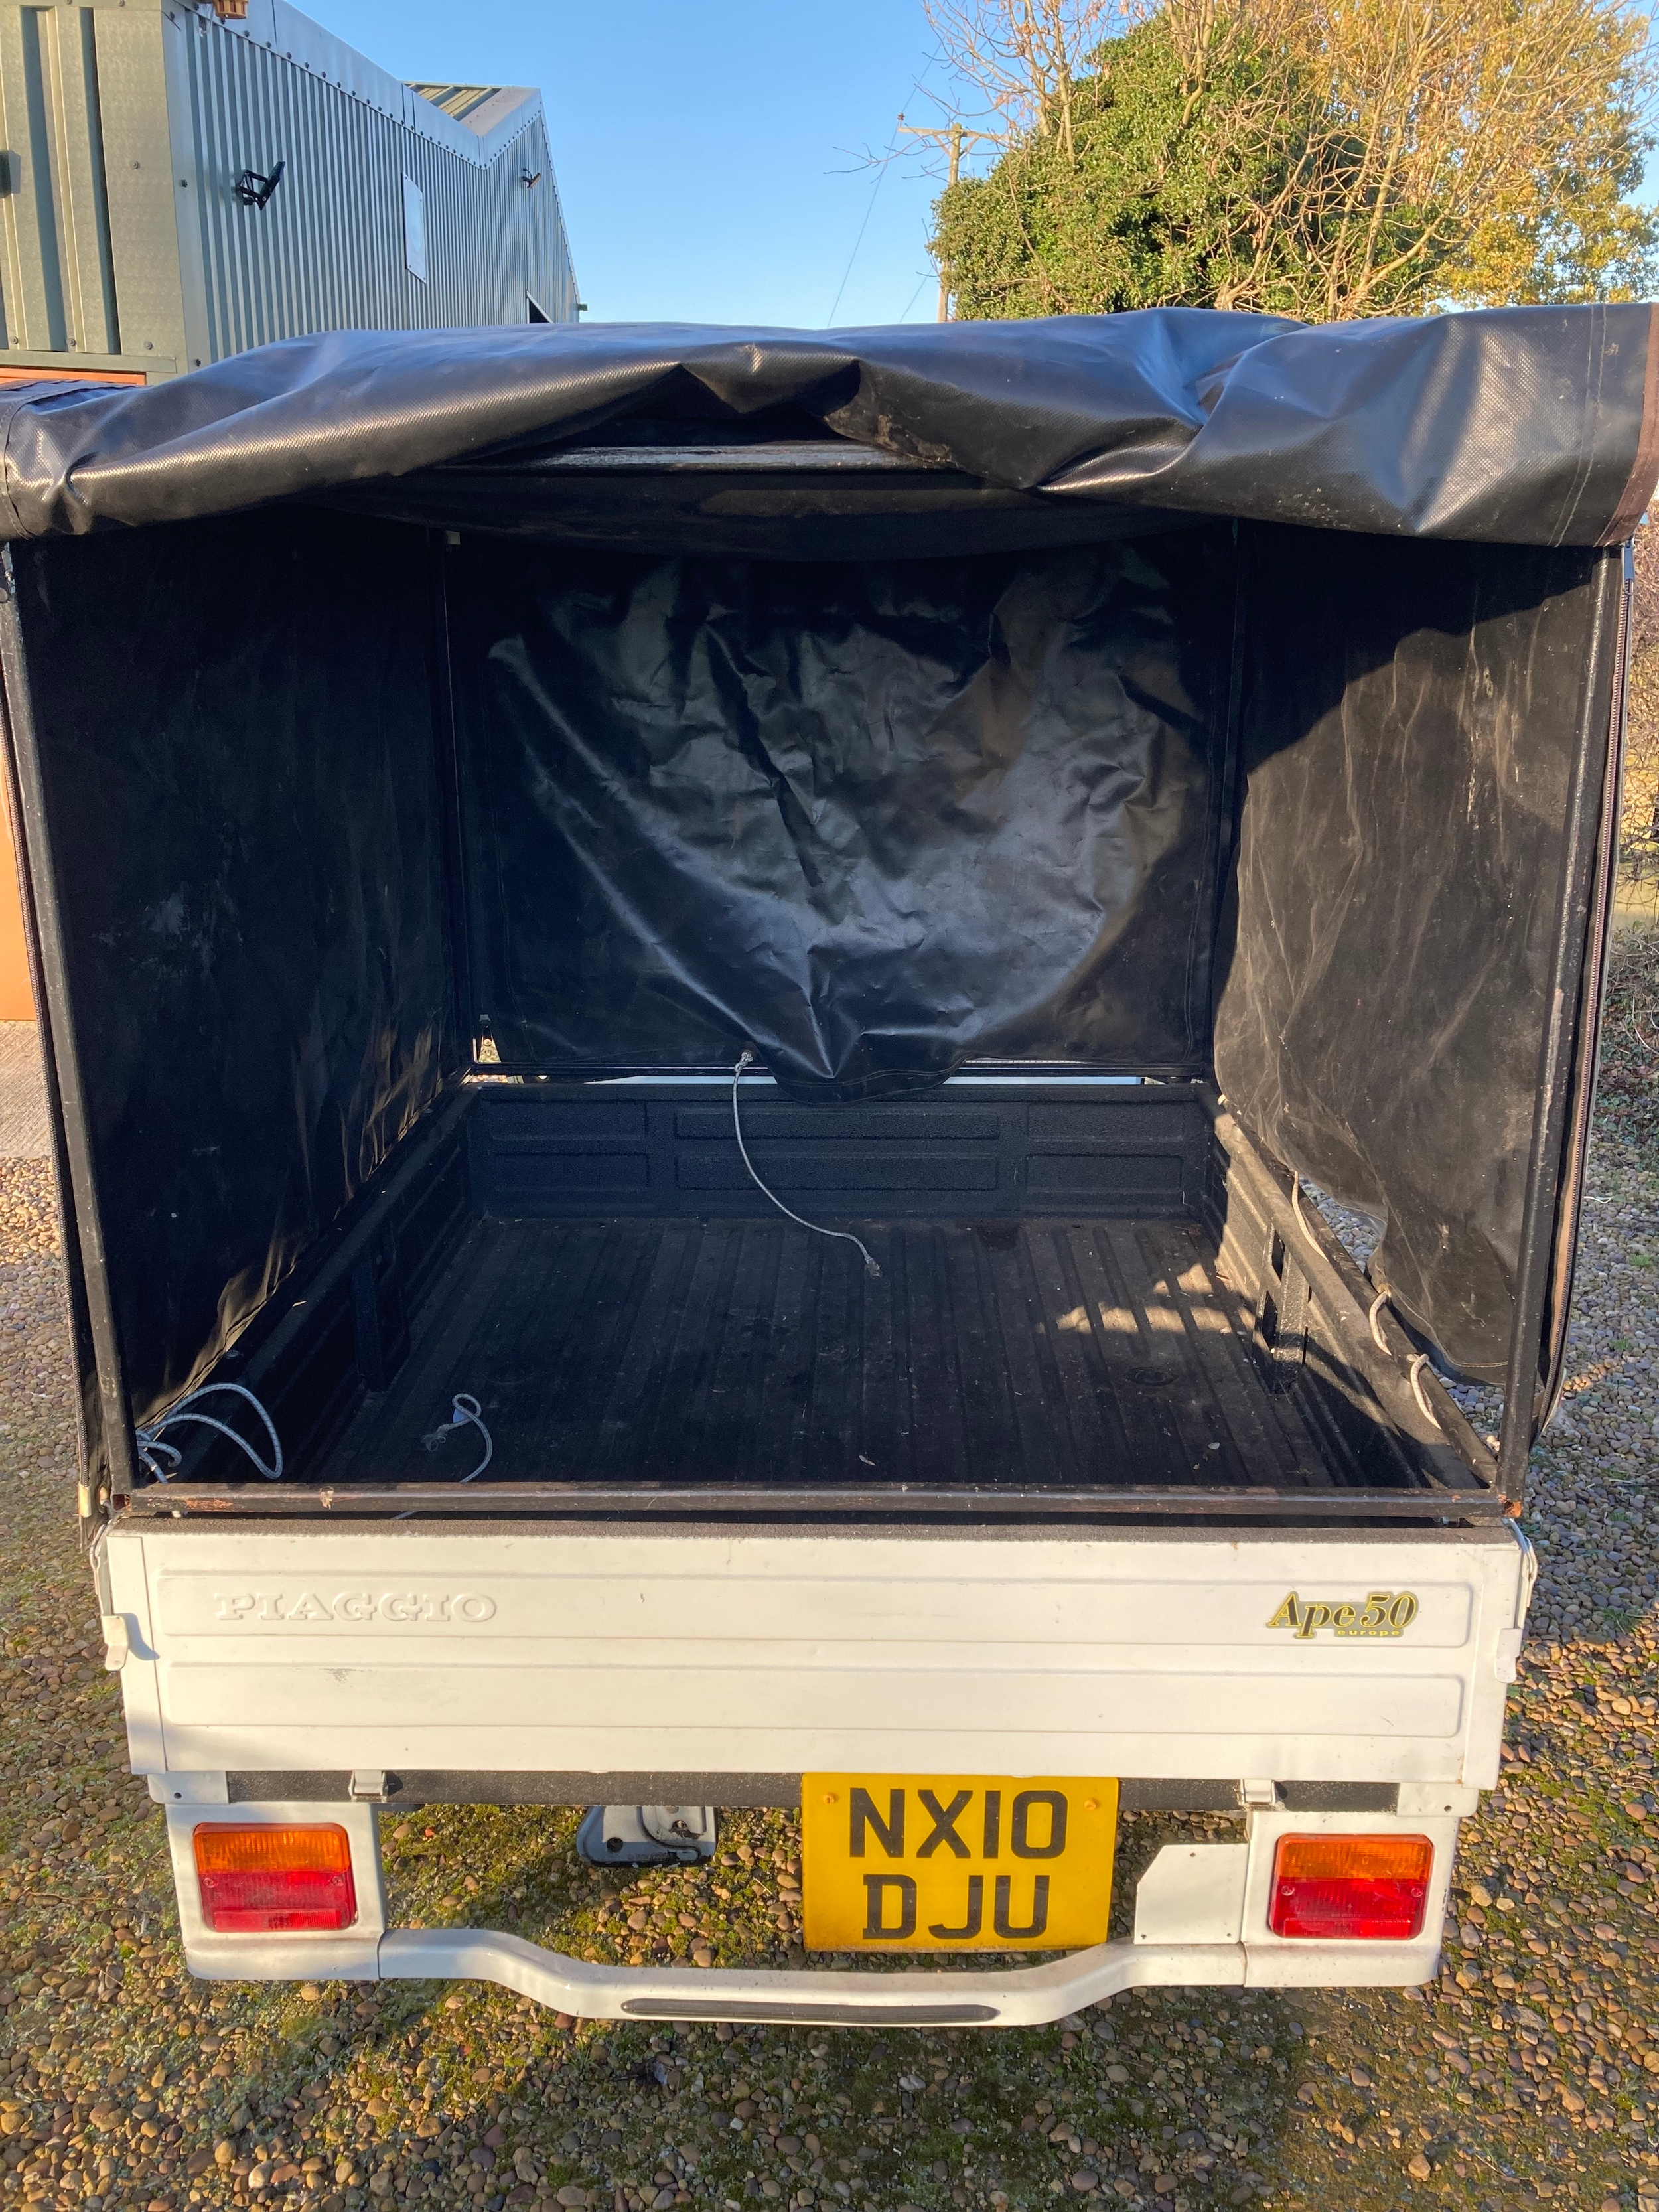 2010 Piaggio APE Pickup, 49.8cc. Registration number NX10 DJU. Chassis number TBC. Engine number - Image 4 of 9